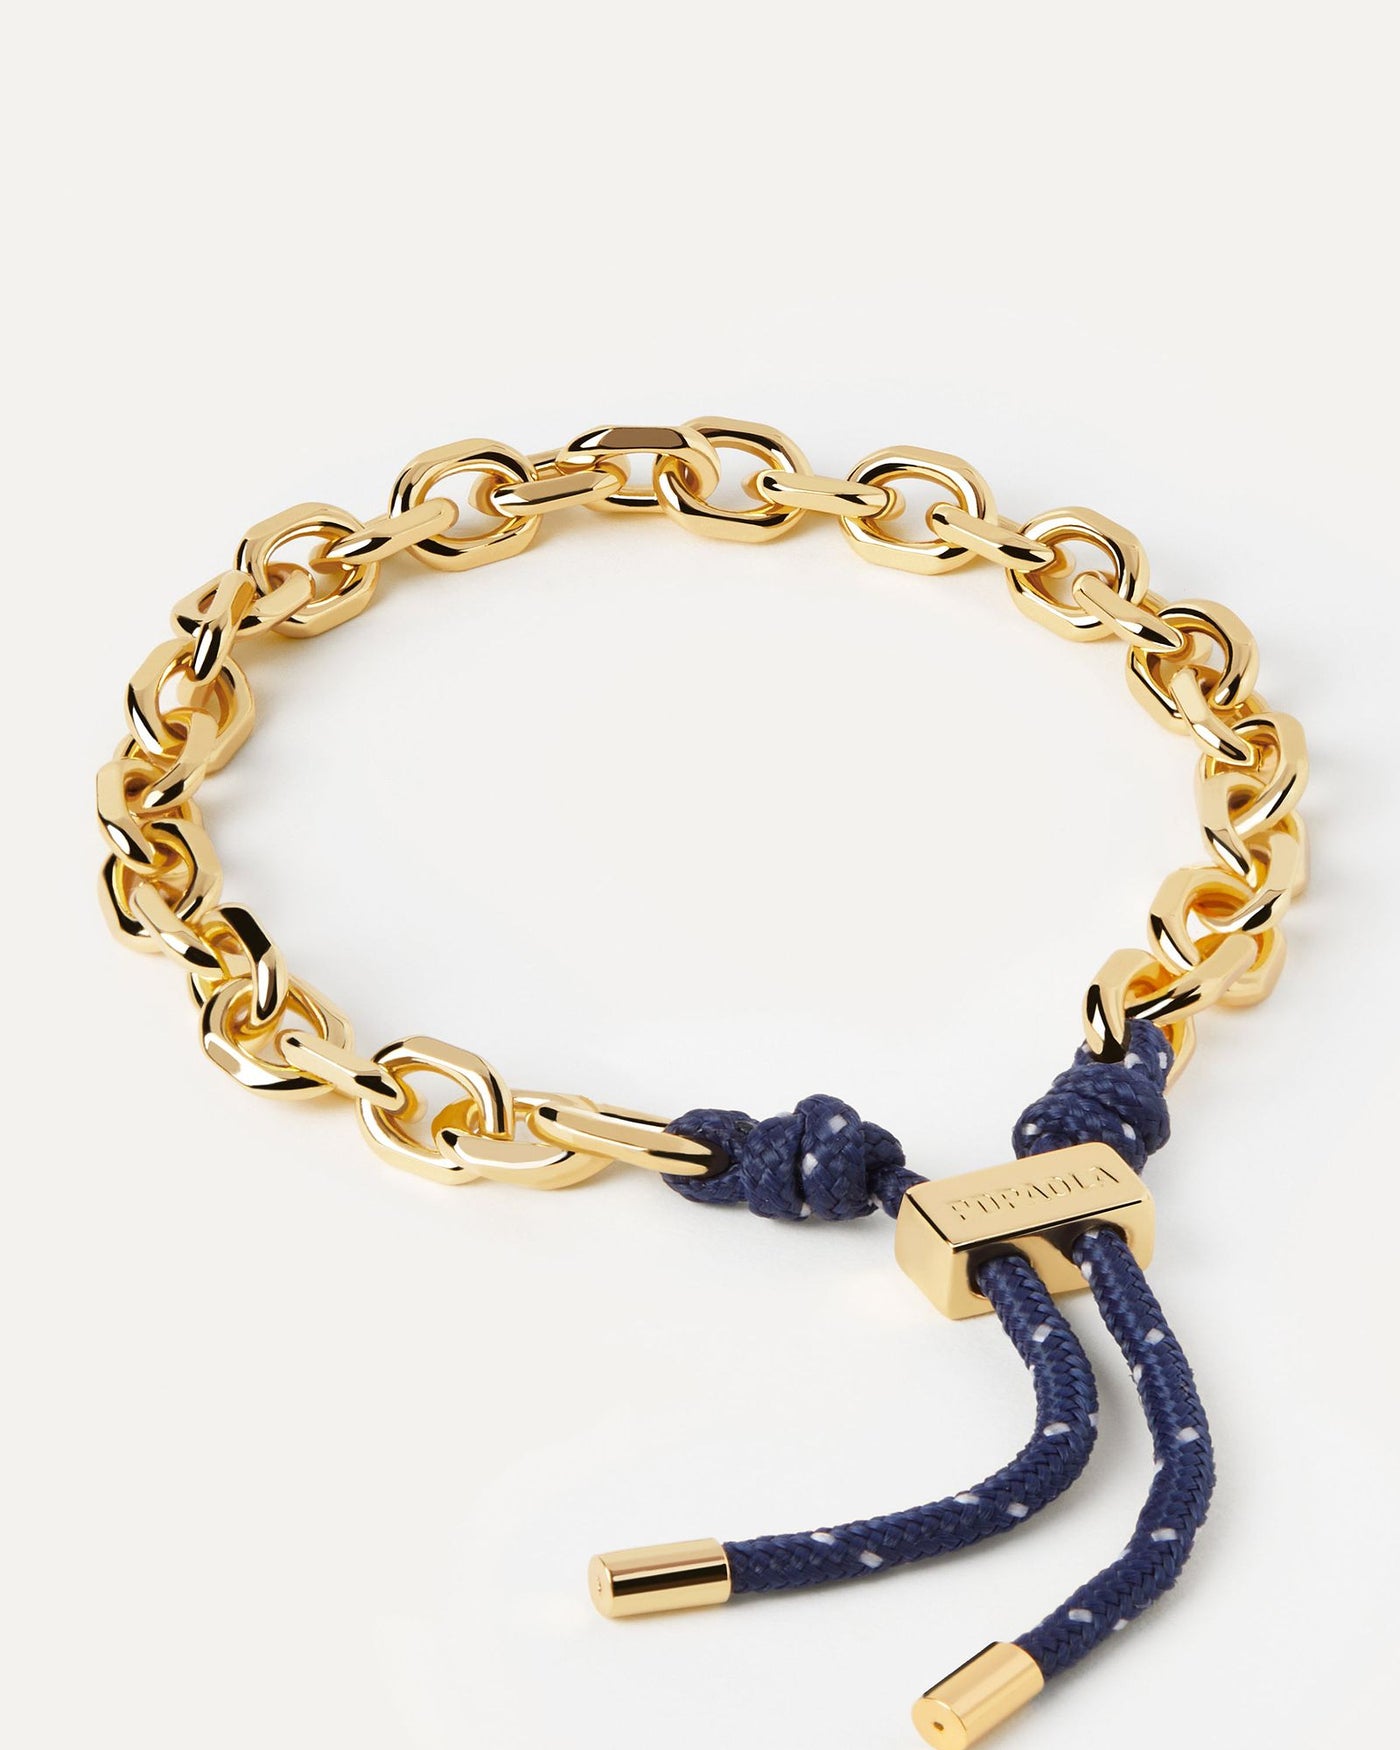 2024 Selection | Midnight Essential Rope and Chain Bracelet. Silver chain bracelet with interwined navy blue rope and adjustable sliding clasp. Get the latest arrival from PDPAOLA. Place your order safely and get this Best Seller. Free Shipping.